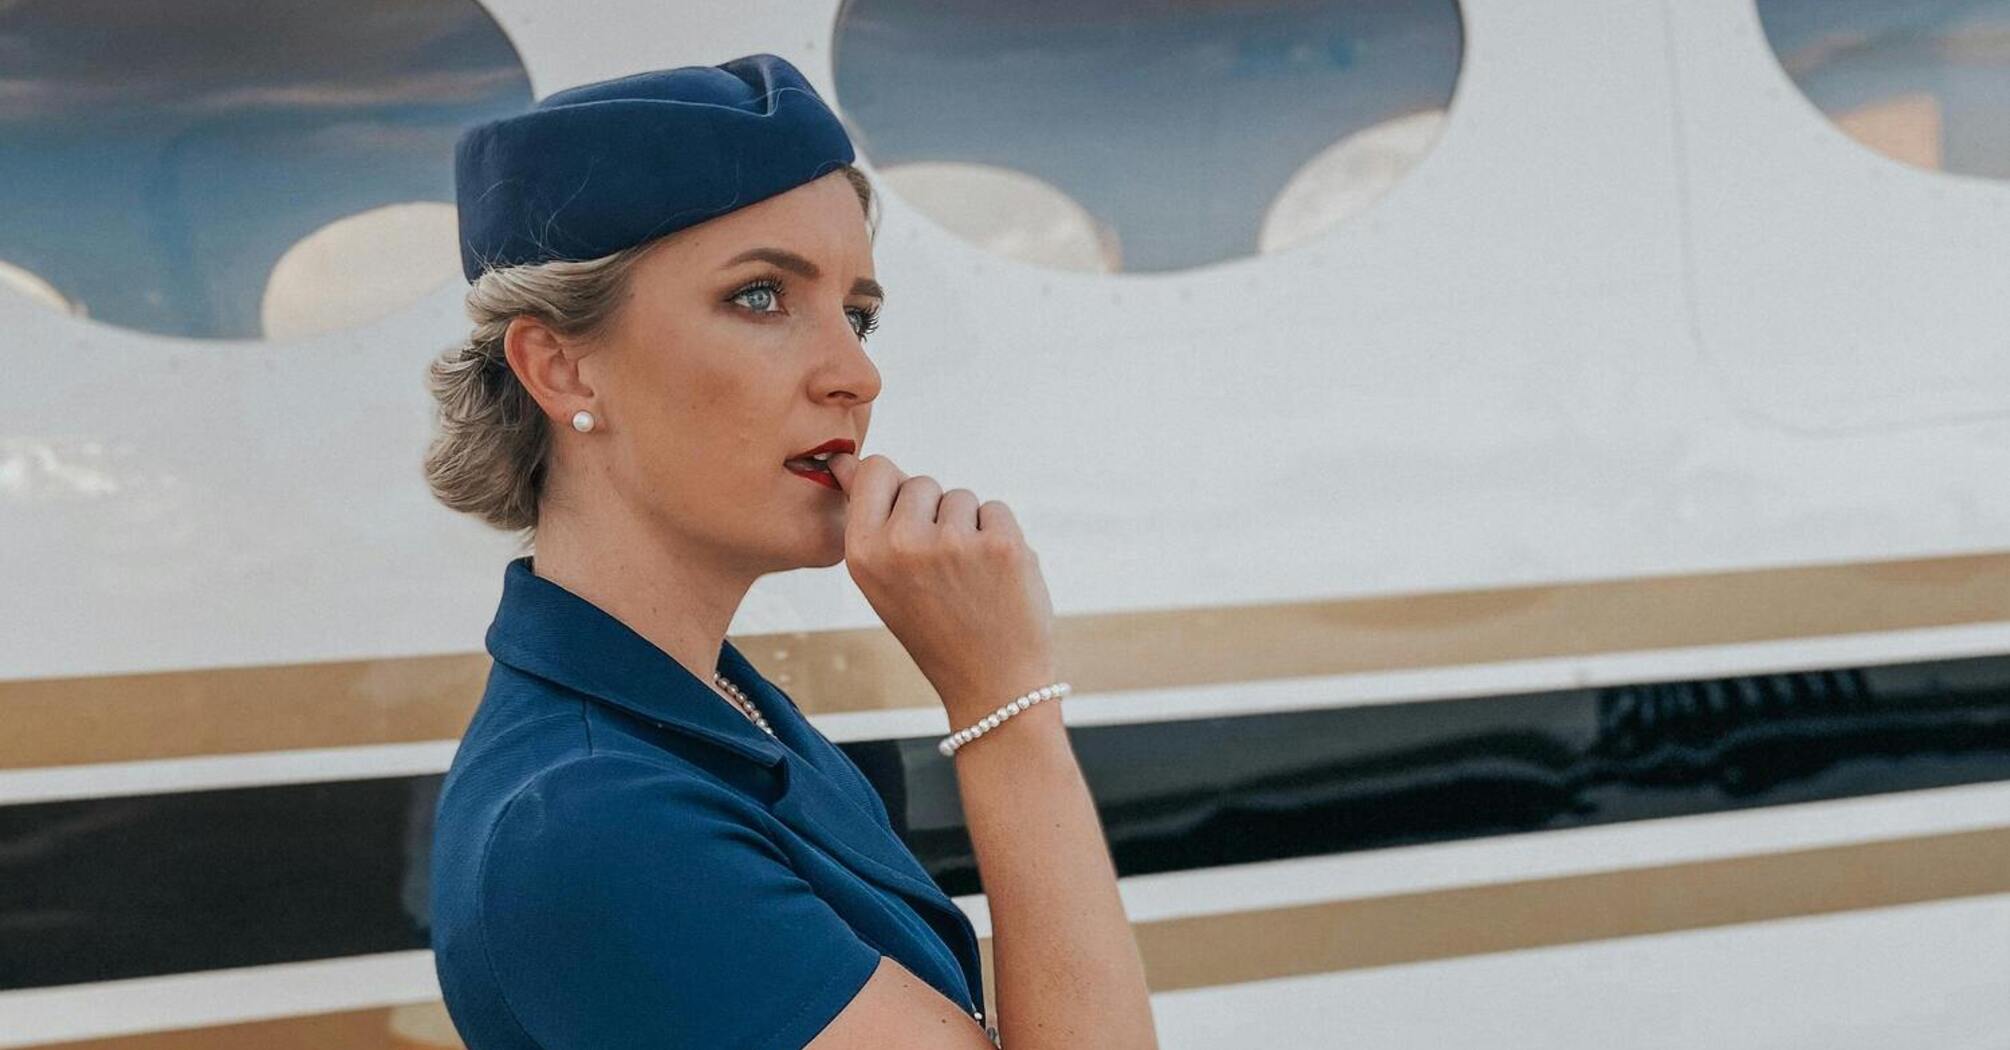 Free champagne or a better seat: a crew member explains why it's useful to be polite to flight attendants